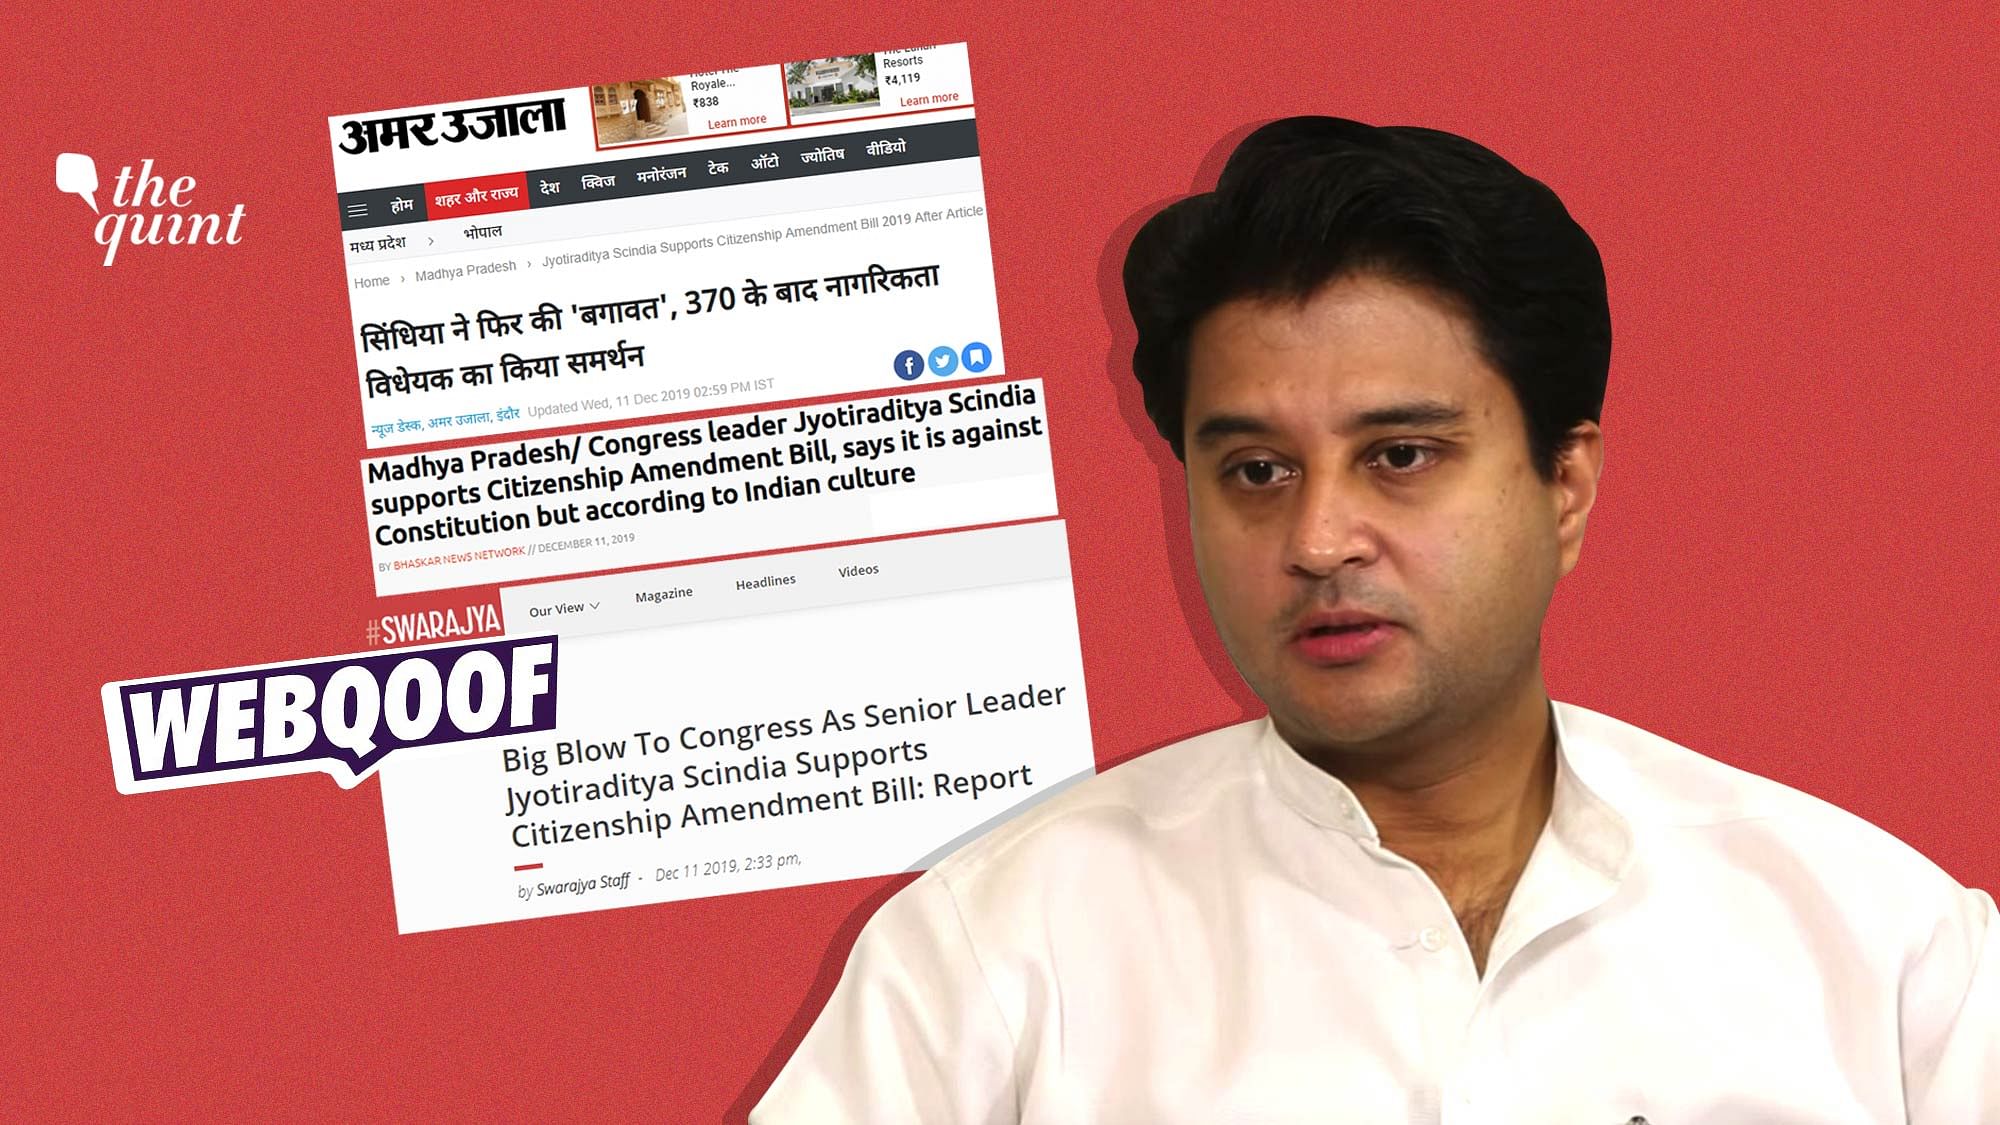 Several media organisations misquoted Congress leader Jyotiraditya Scindia claiming that he supported the CAB.